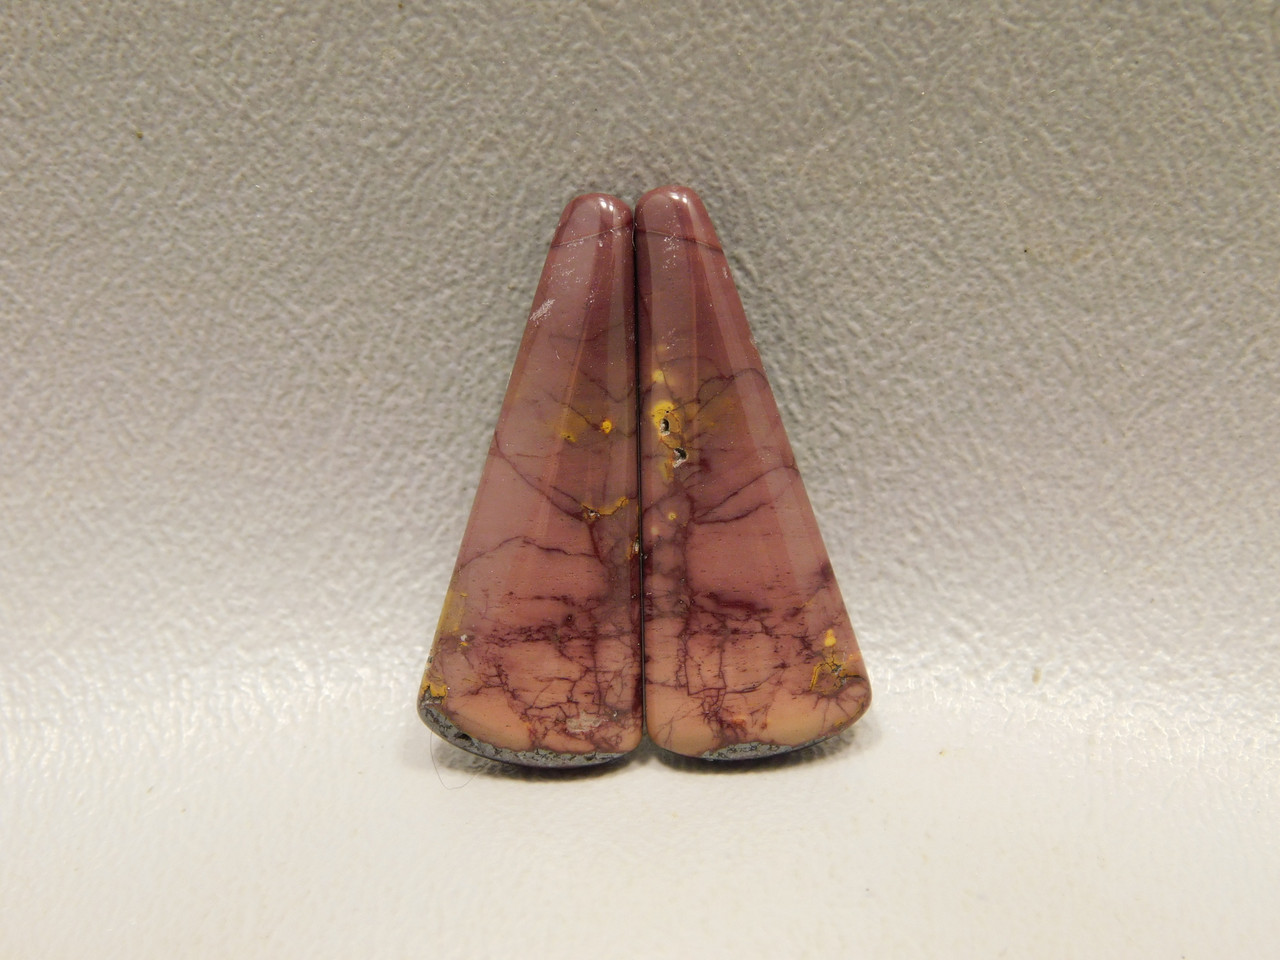 Mookaite Jasper Matched Pair Cabochons #10